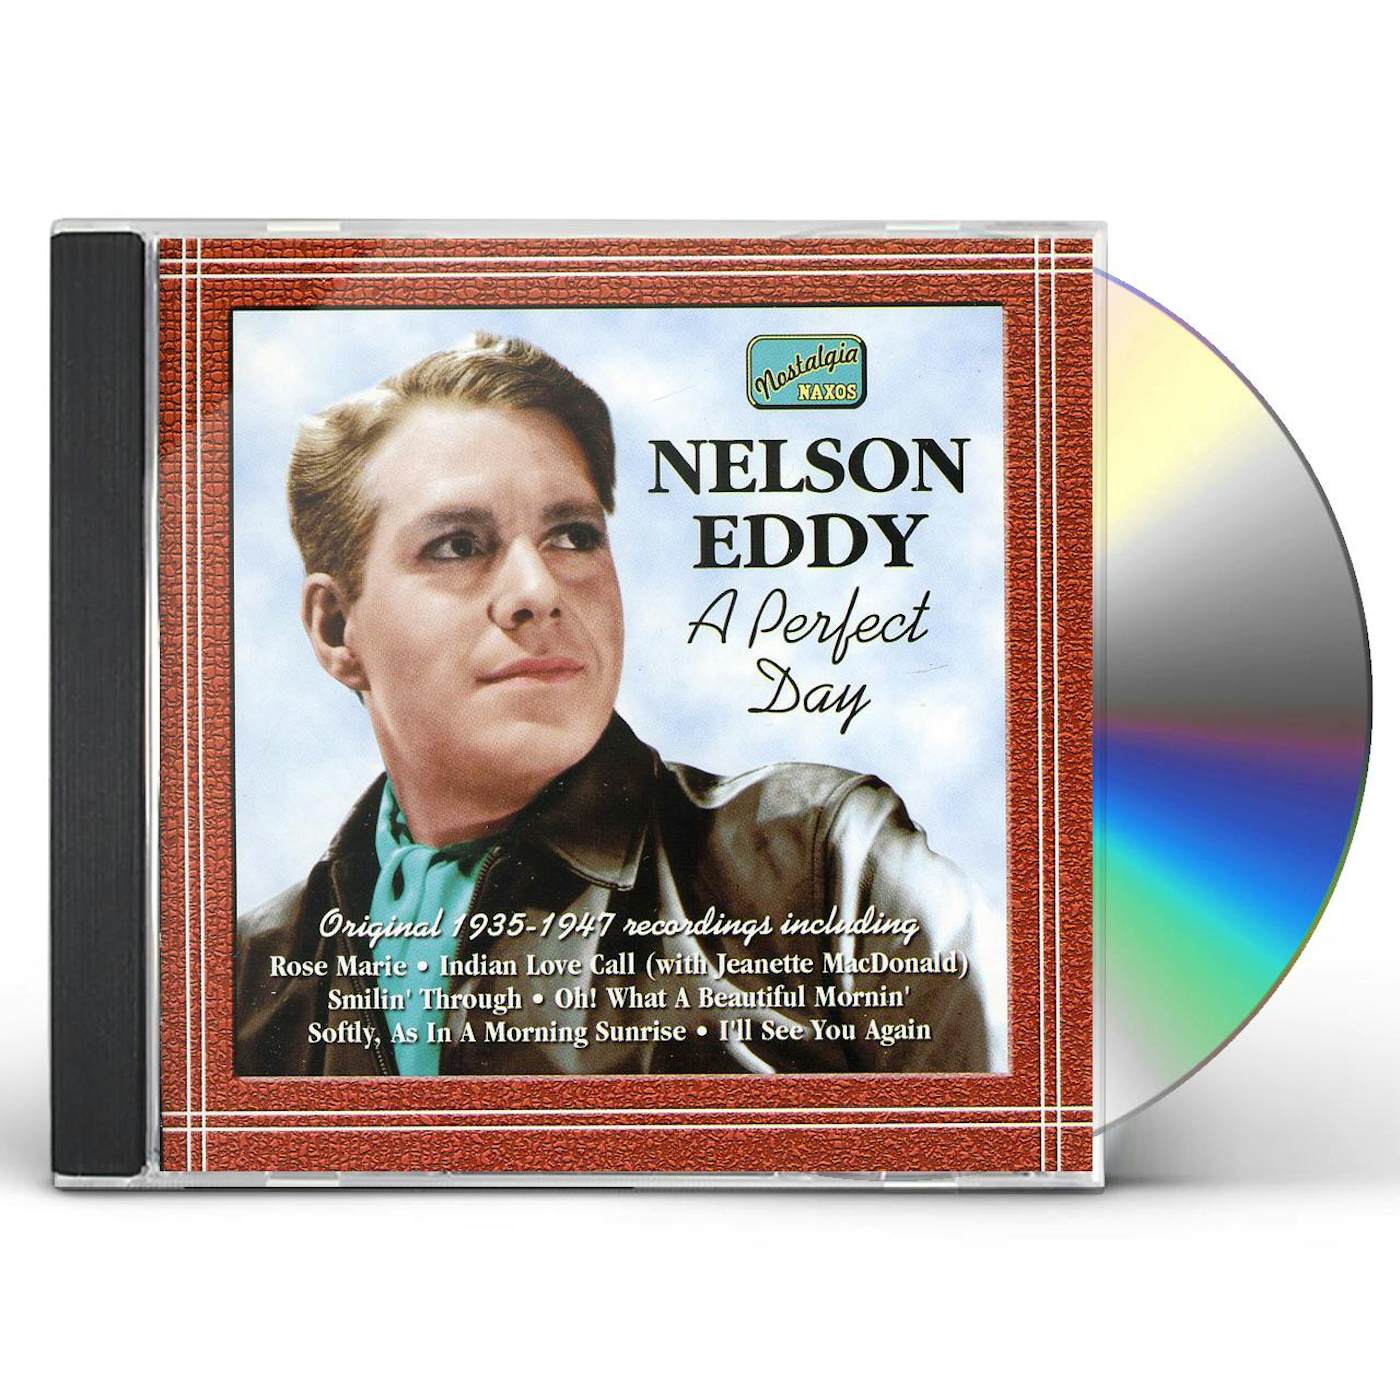 Nelson Eddy PERFECT DAY (1935-47) CD